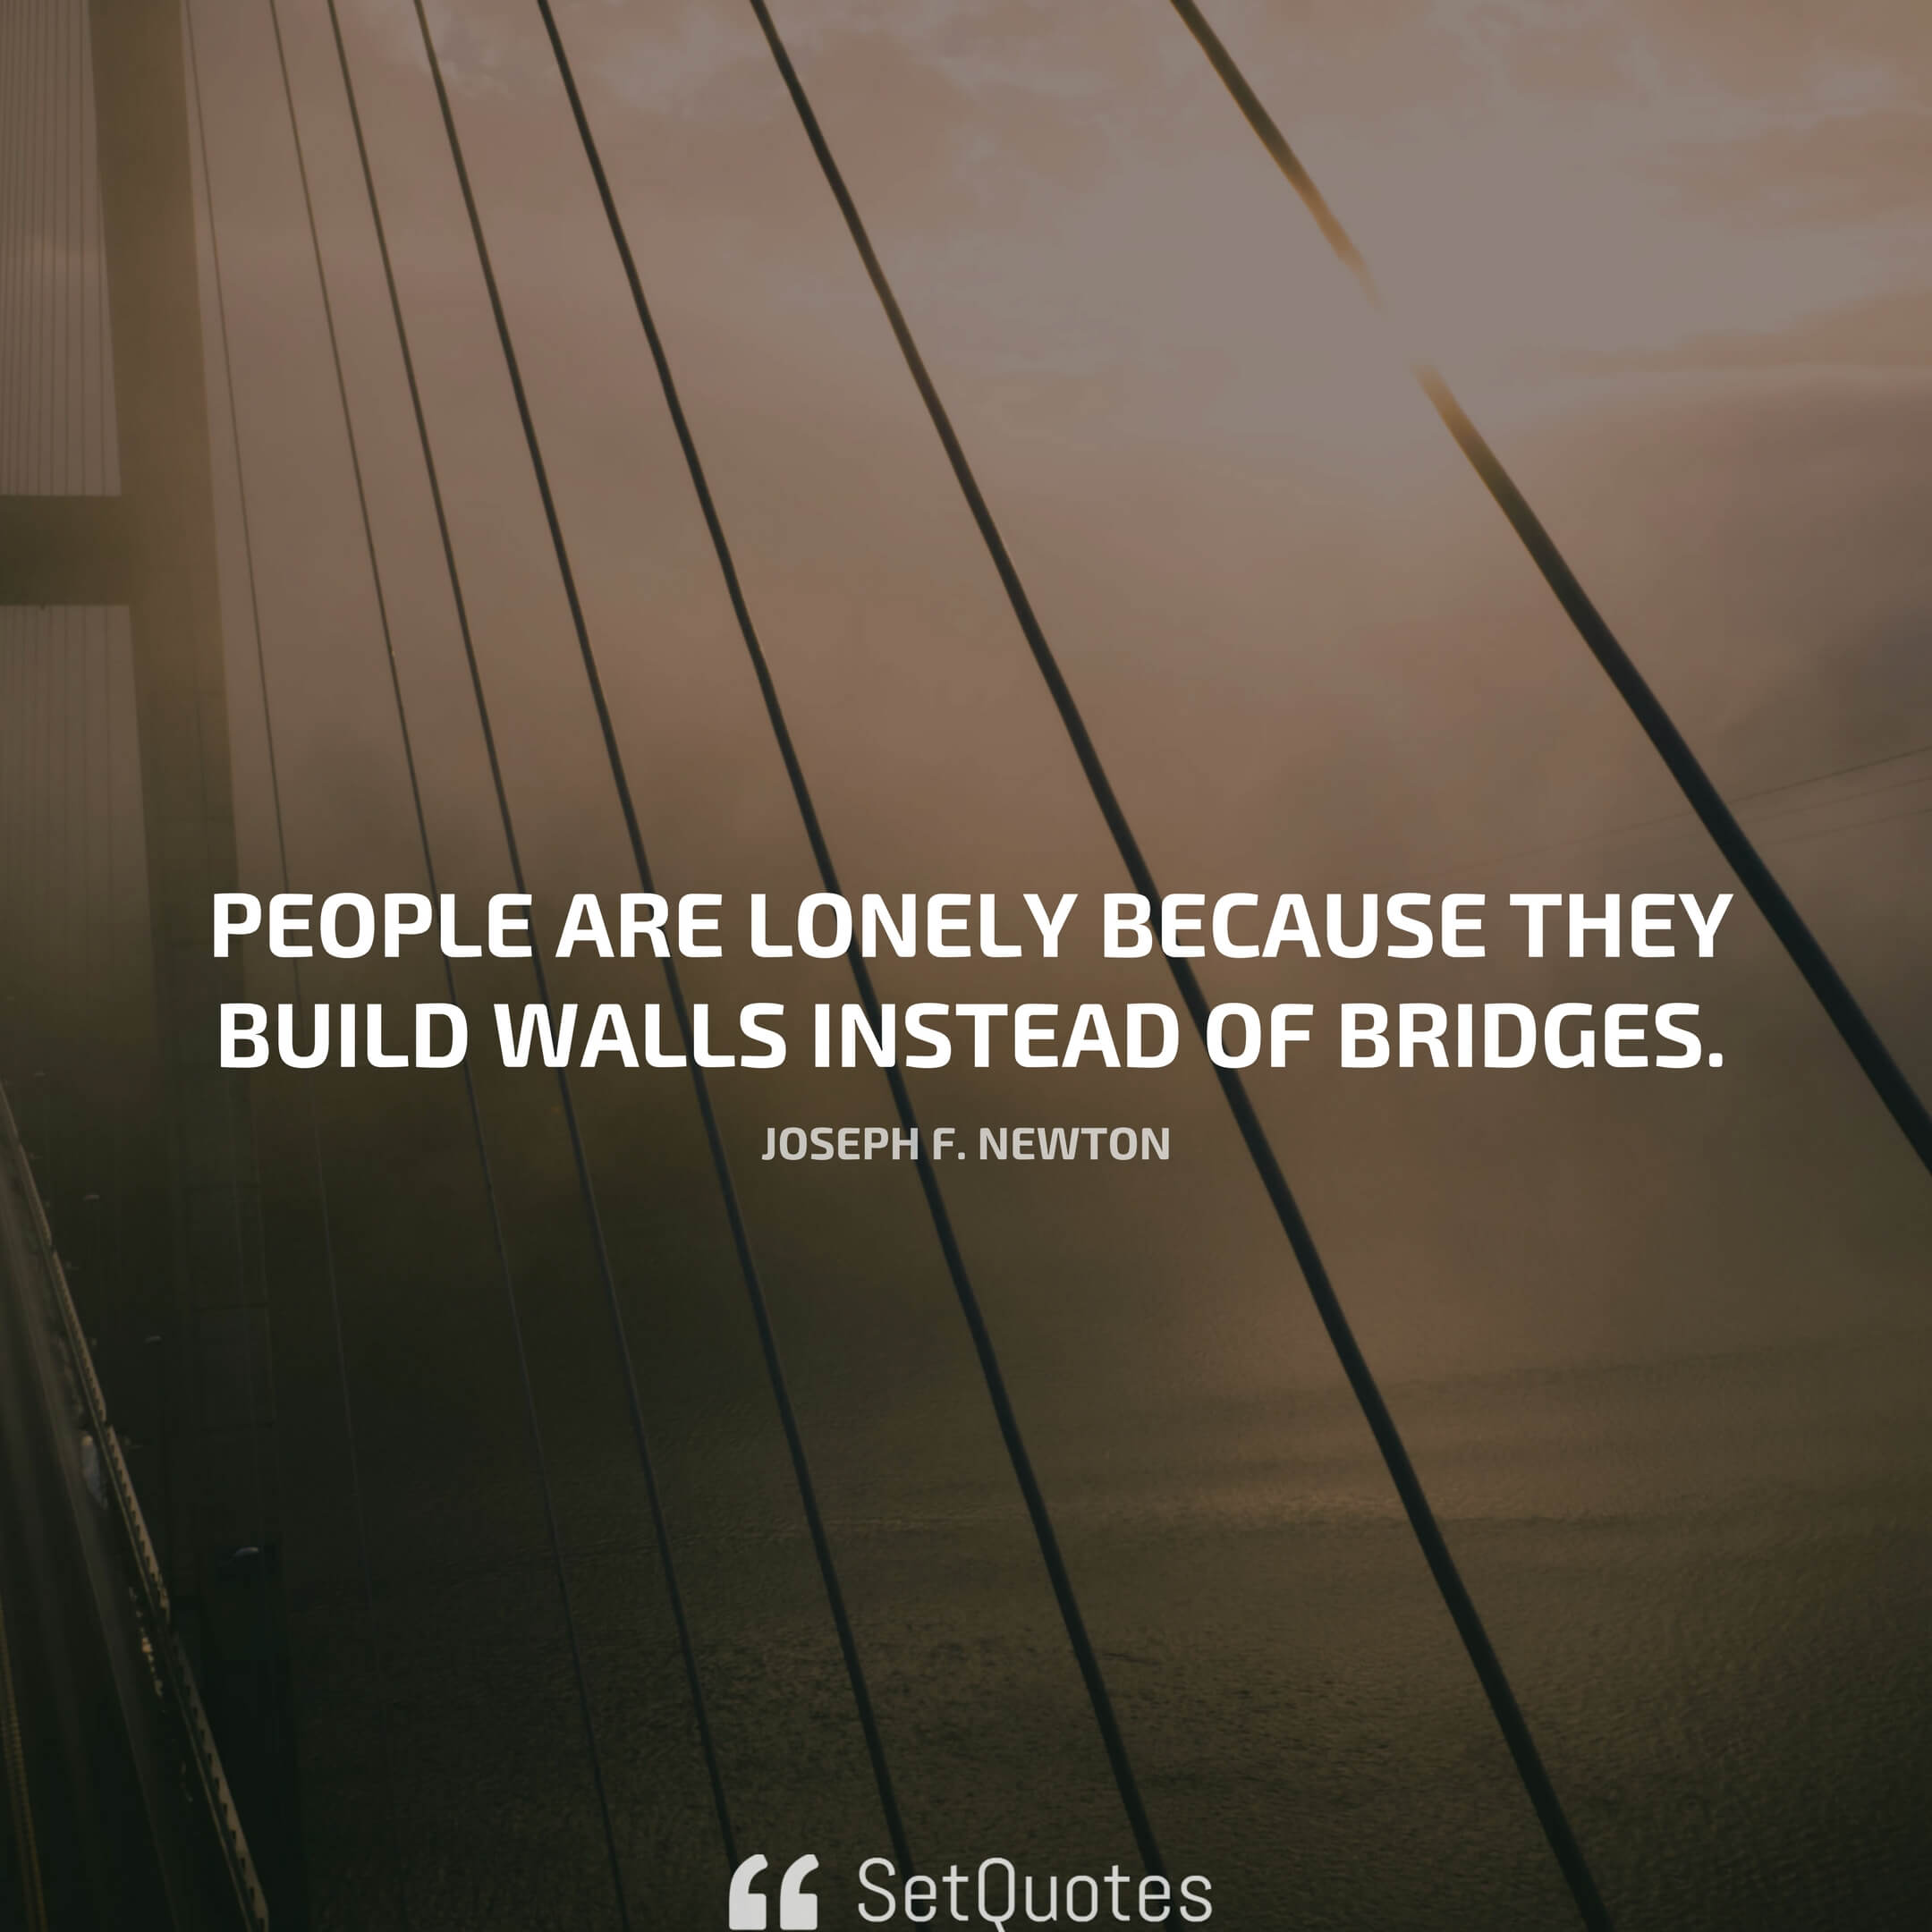 “People are lonely because they build walls instead of bridges.” — Joseph F. Newton